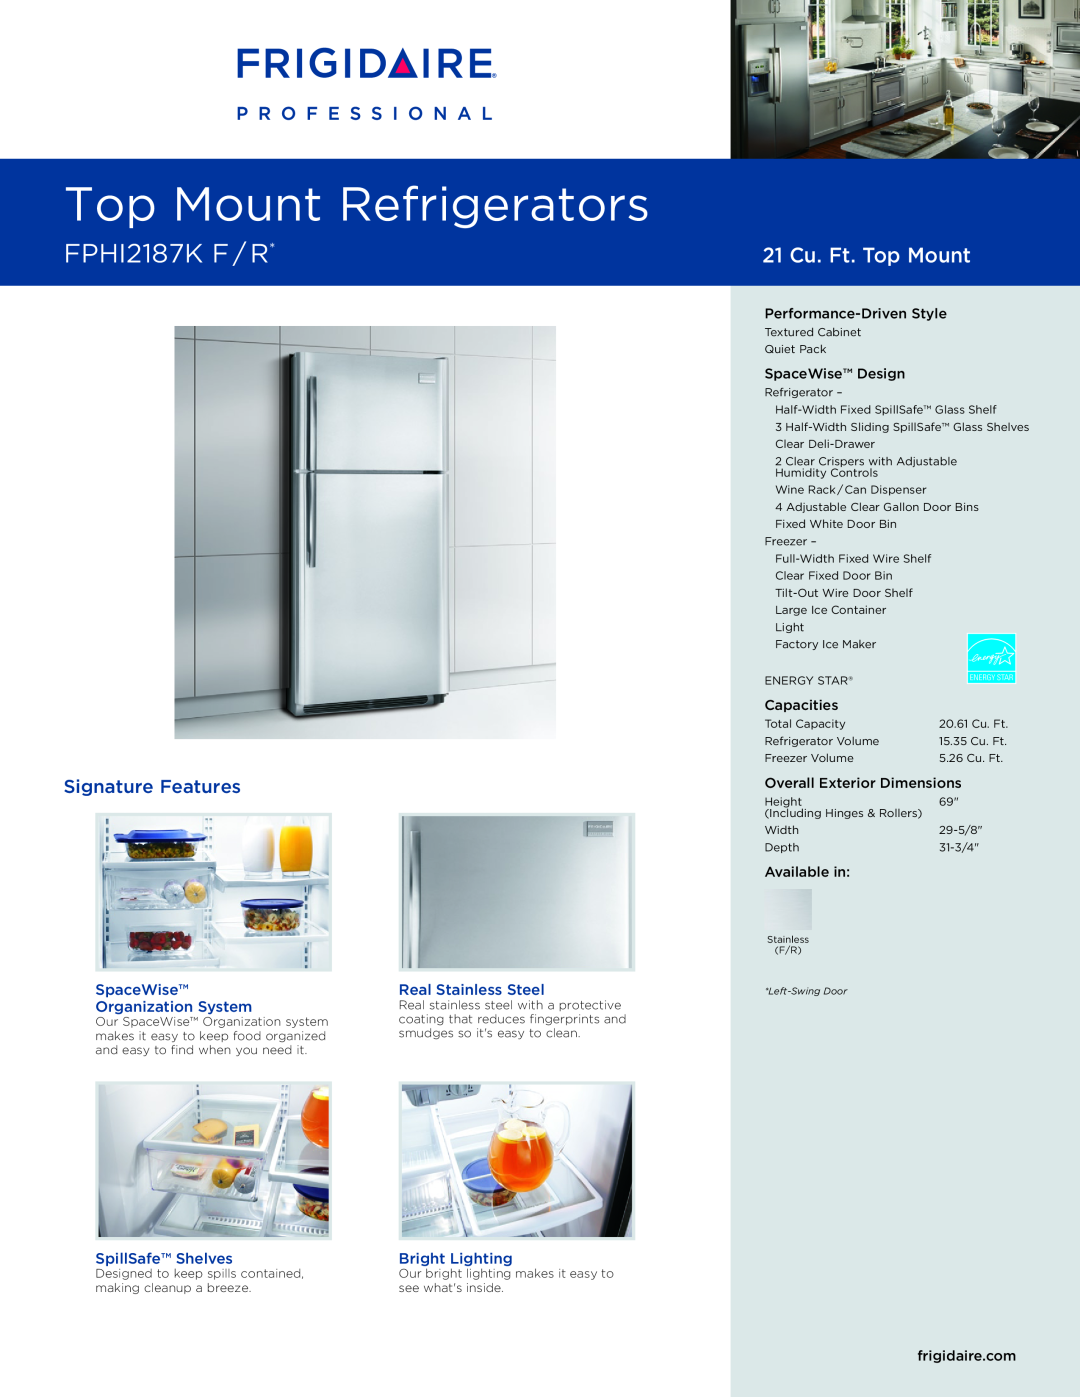 Frigidaire FPHI2187k F/R* dimensions SpaceWise, Real Stainless Steel, Organization System, SpillSafe Shelves, Capacities 